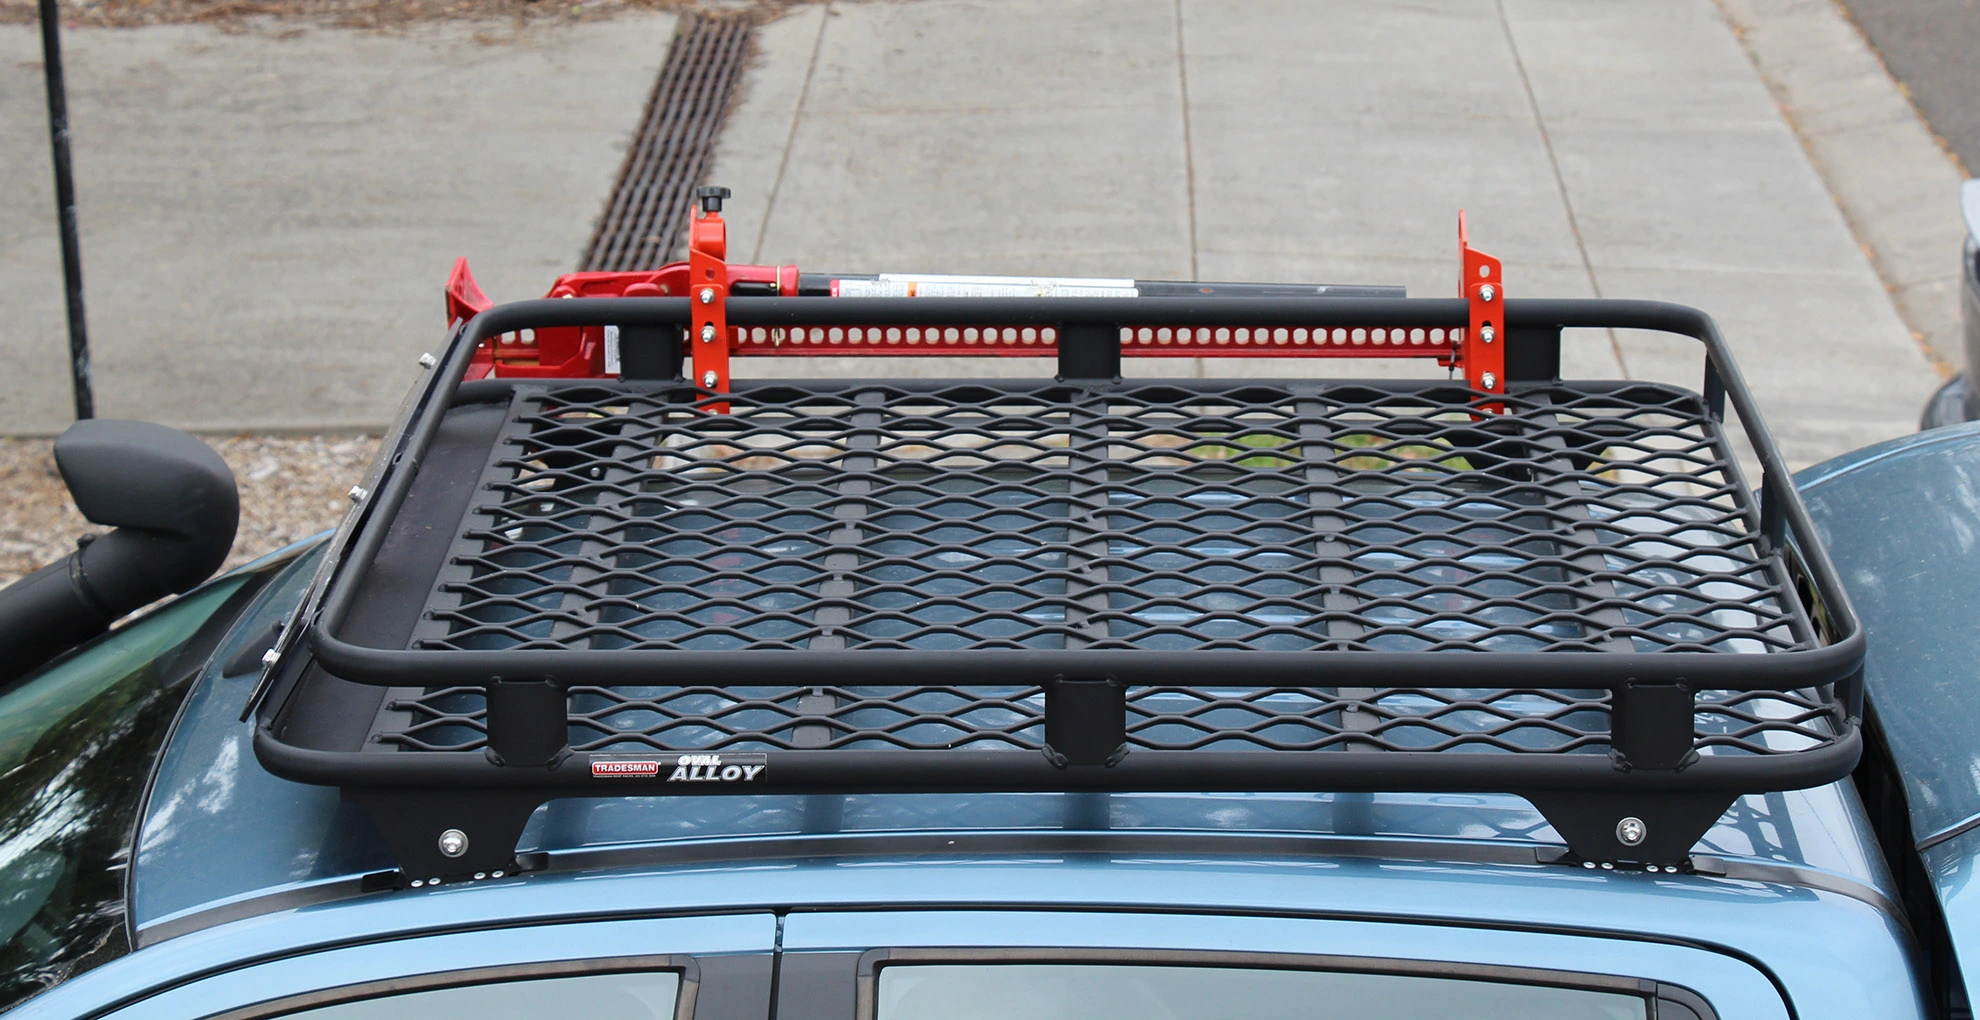 Ford-Ranger-Crew-Cab-with-Oval-Alloy-basket-style-roof-rack-with-mesh-floor-and-jack-and-shovel-holder